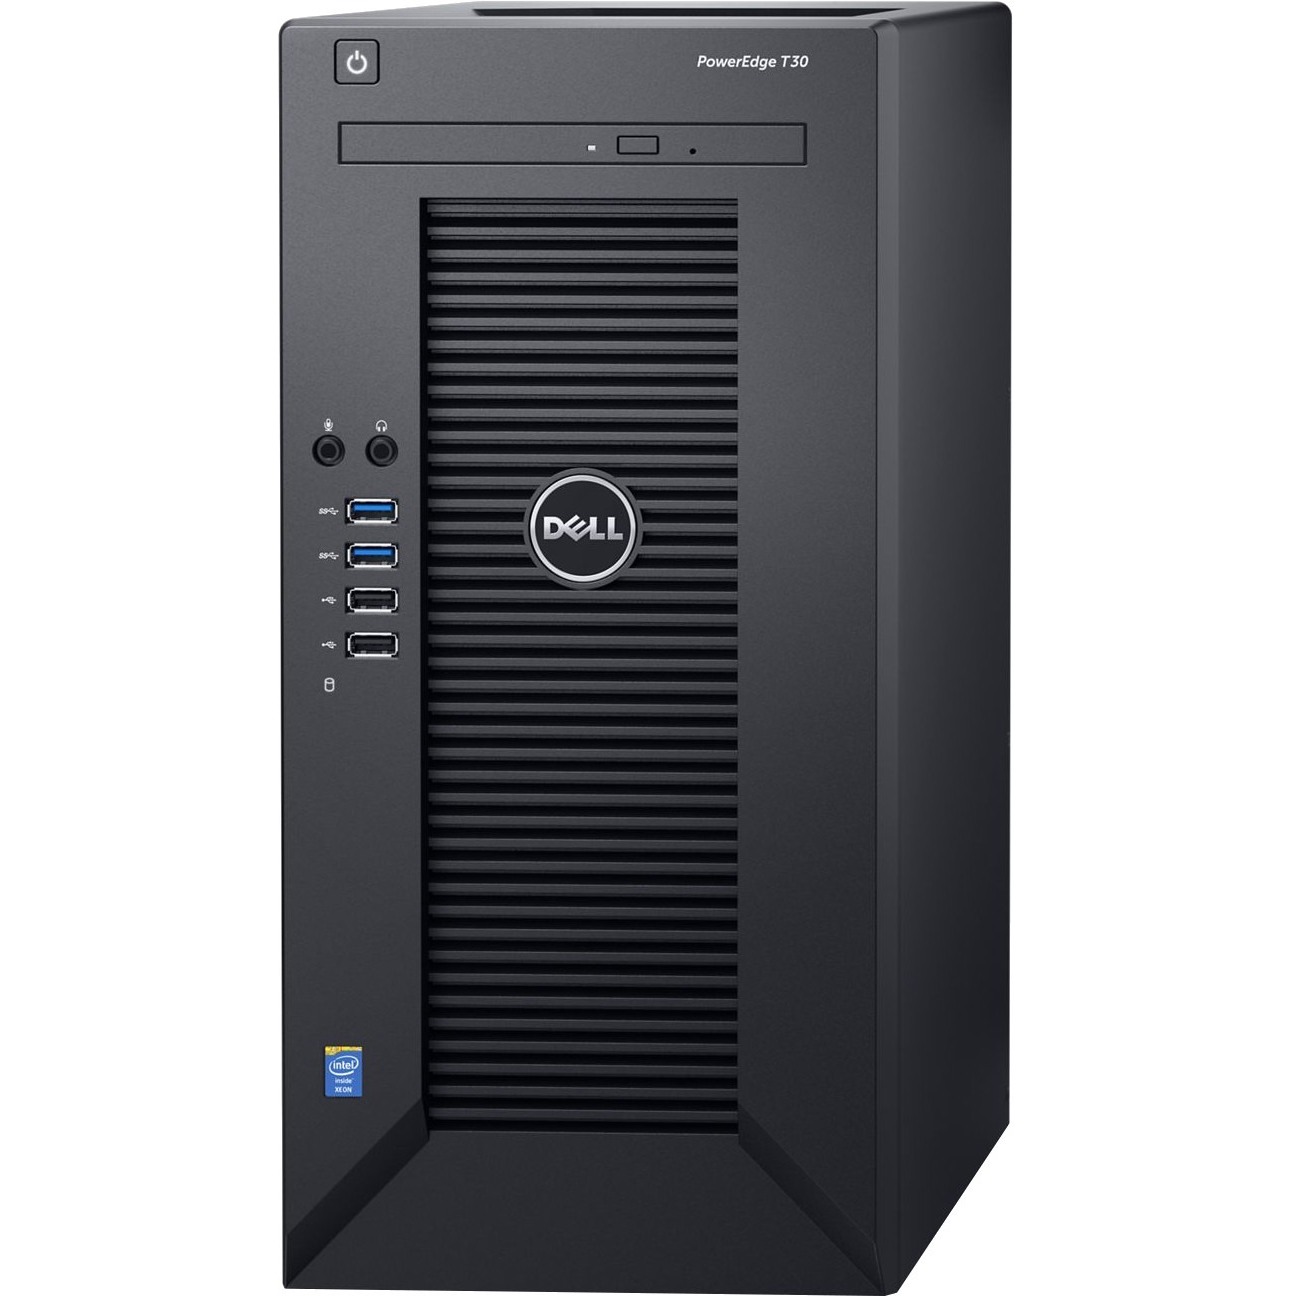 Dell PowerEdge T30 Tower Server  | Navya Solutions | survers in Hyderabad,server suppliers in hyderabad,Dell PowerEdge T30 Tower Server  in Hyderabad,Dell PowerEdge T30 Tower Servers in Hyderabad,Vijayawada,Visakhapatnam - GL29096